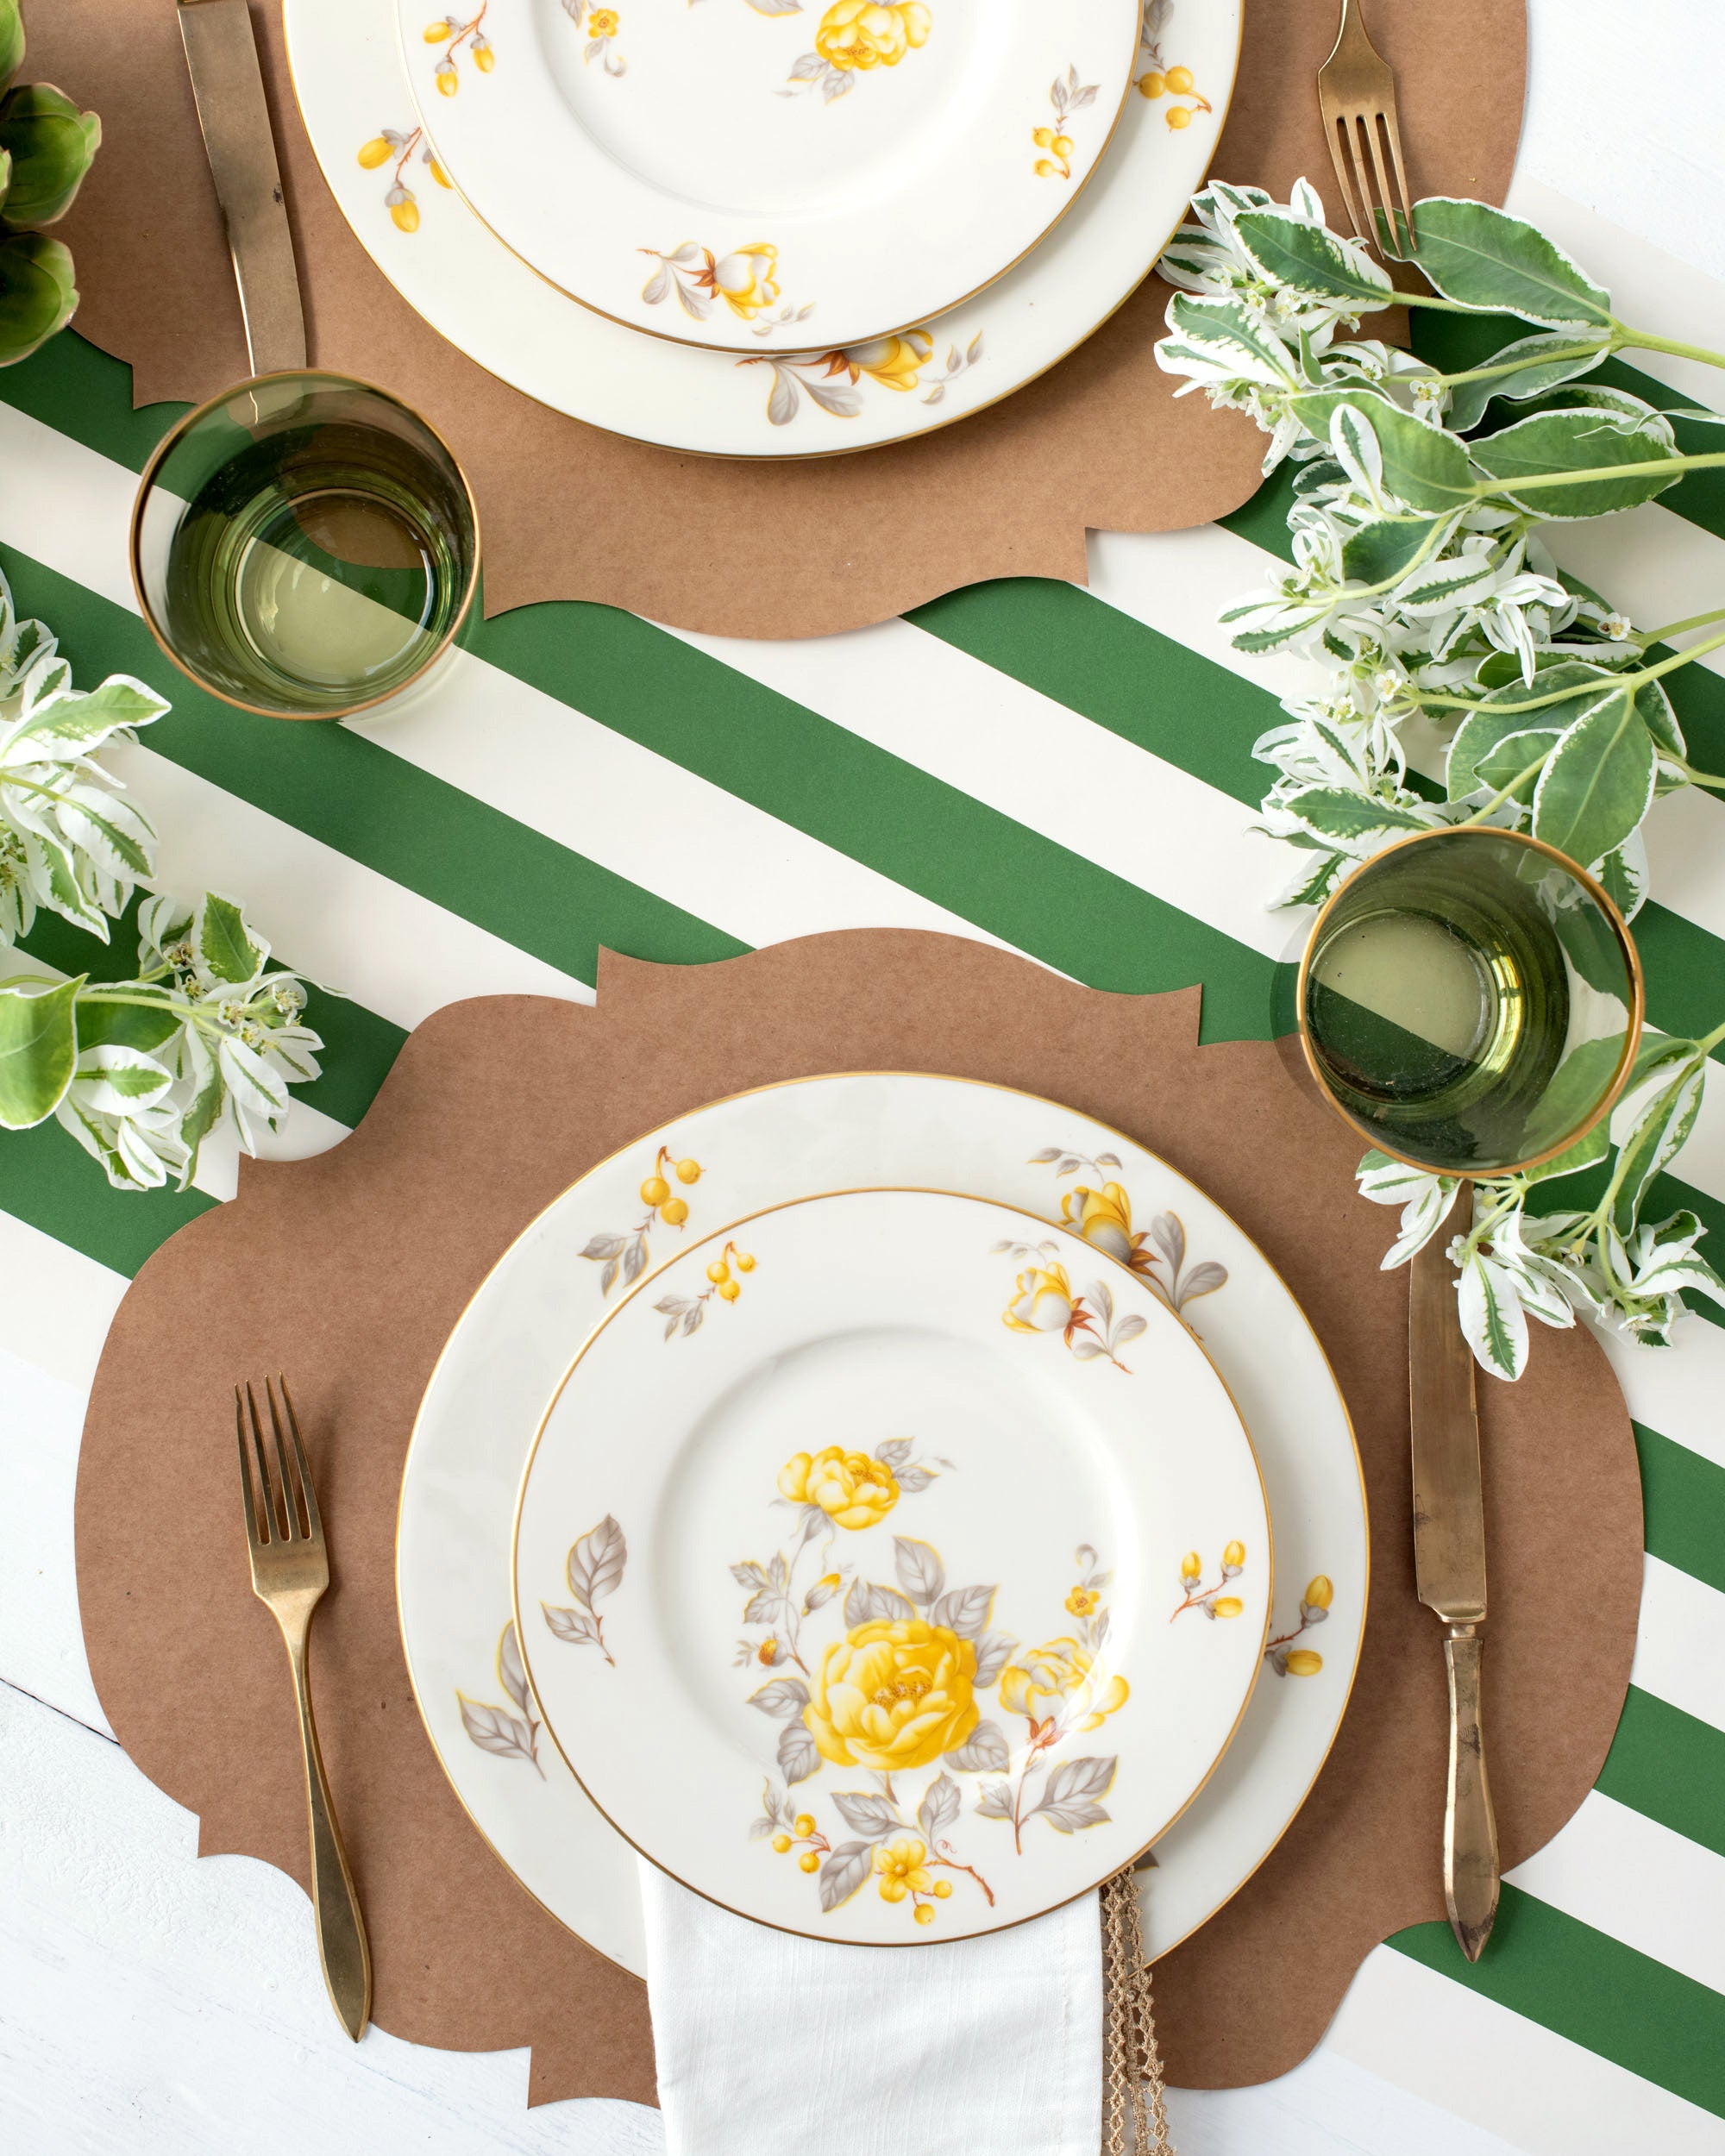 A table setting with plates, silverware, and flowers on a Dark Green Classic Stripe Runner by Hester &amp; Cook.